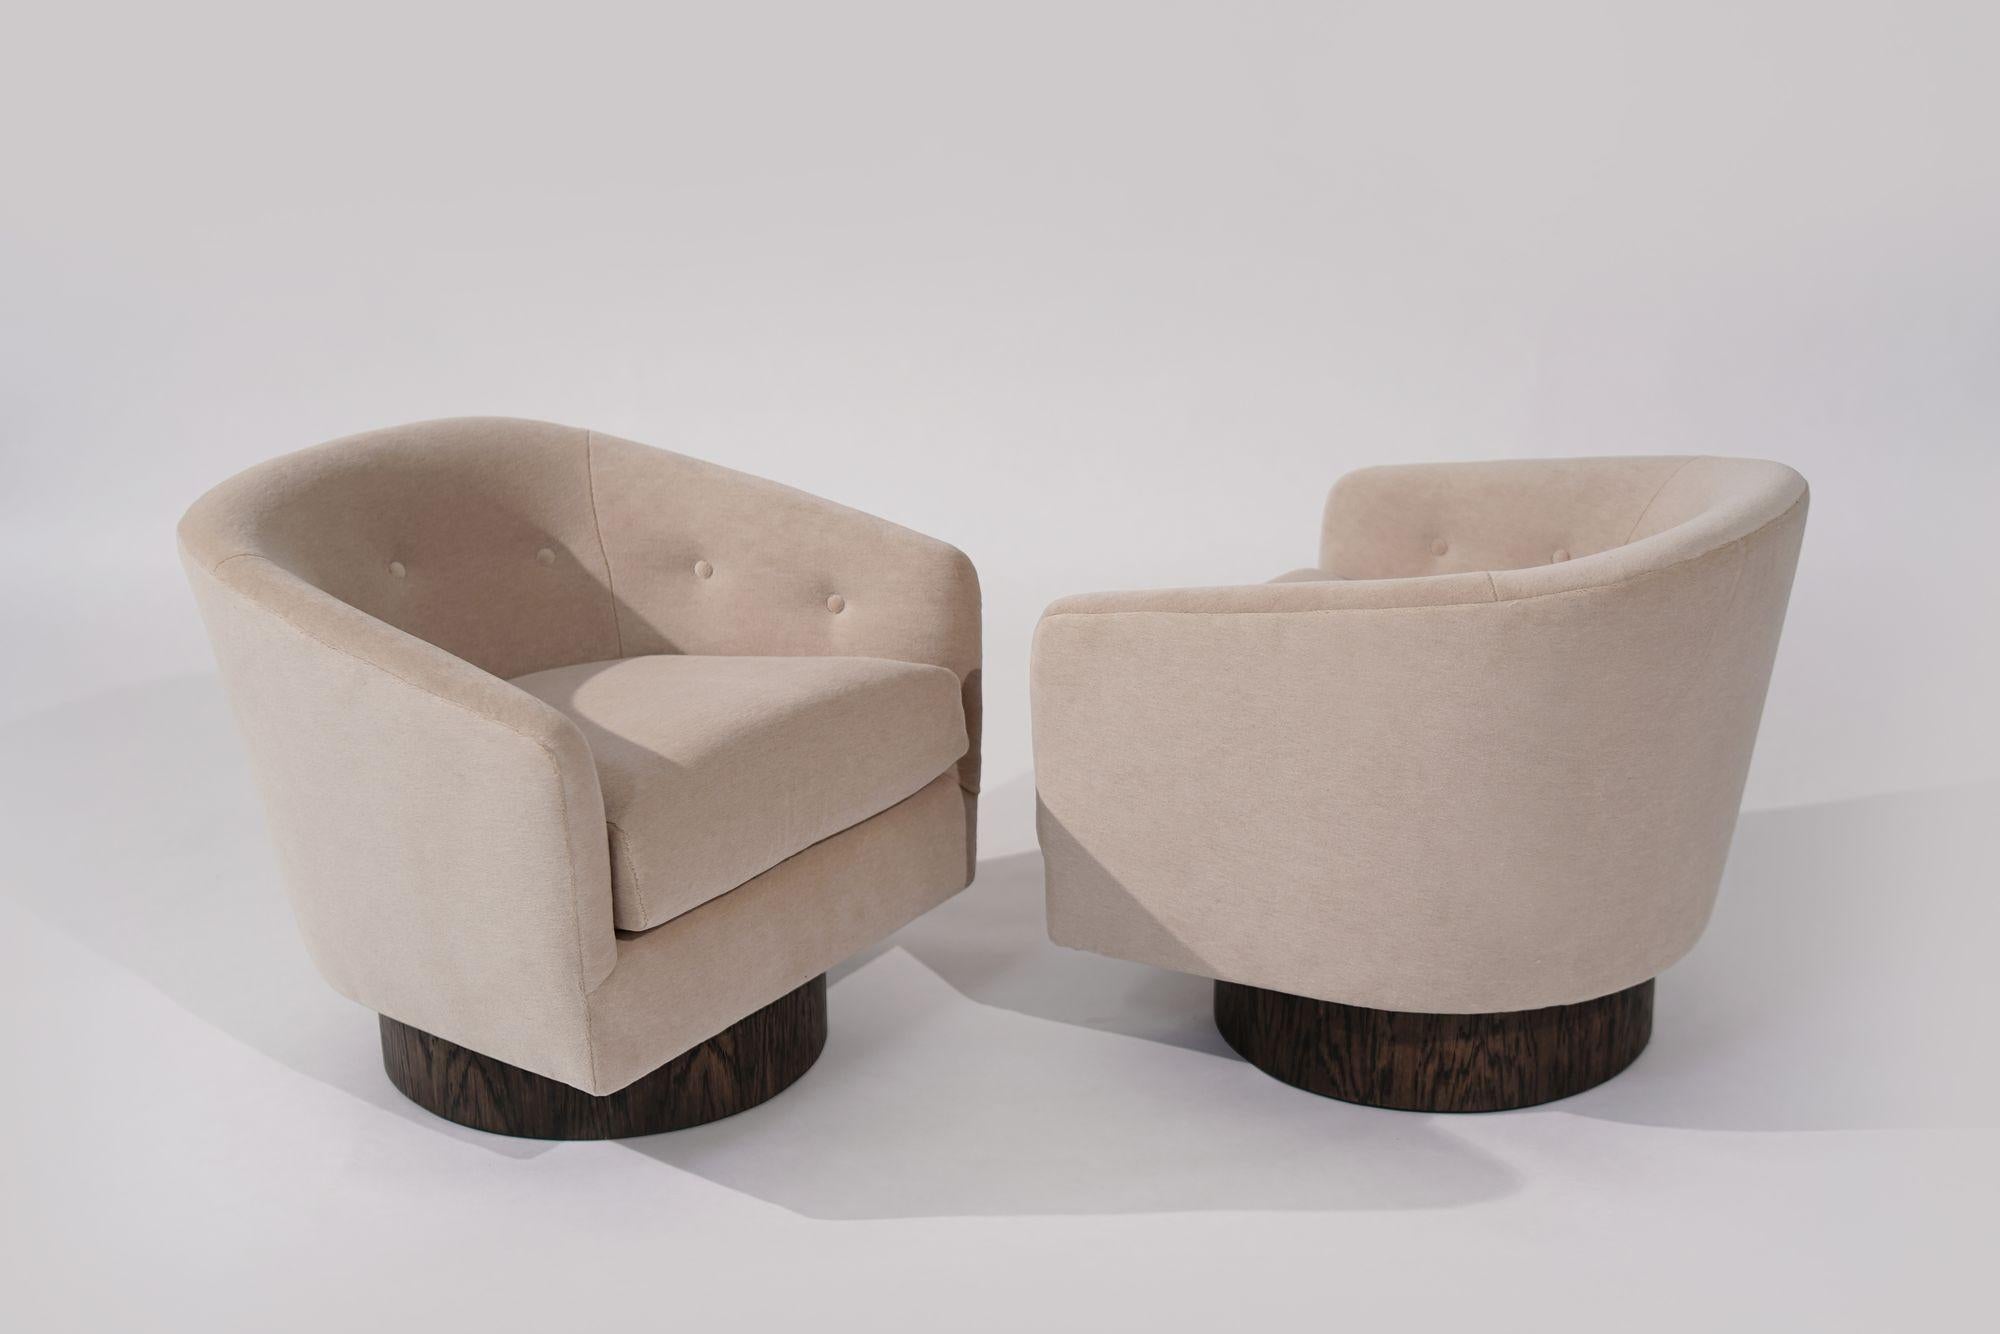 American Set of Swivel Chairs in Natural Mohair, Milo Baughman, C. 1970s For Sale